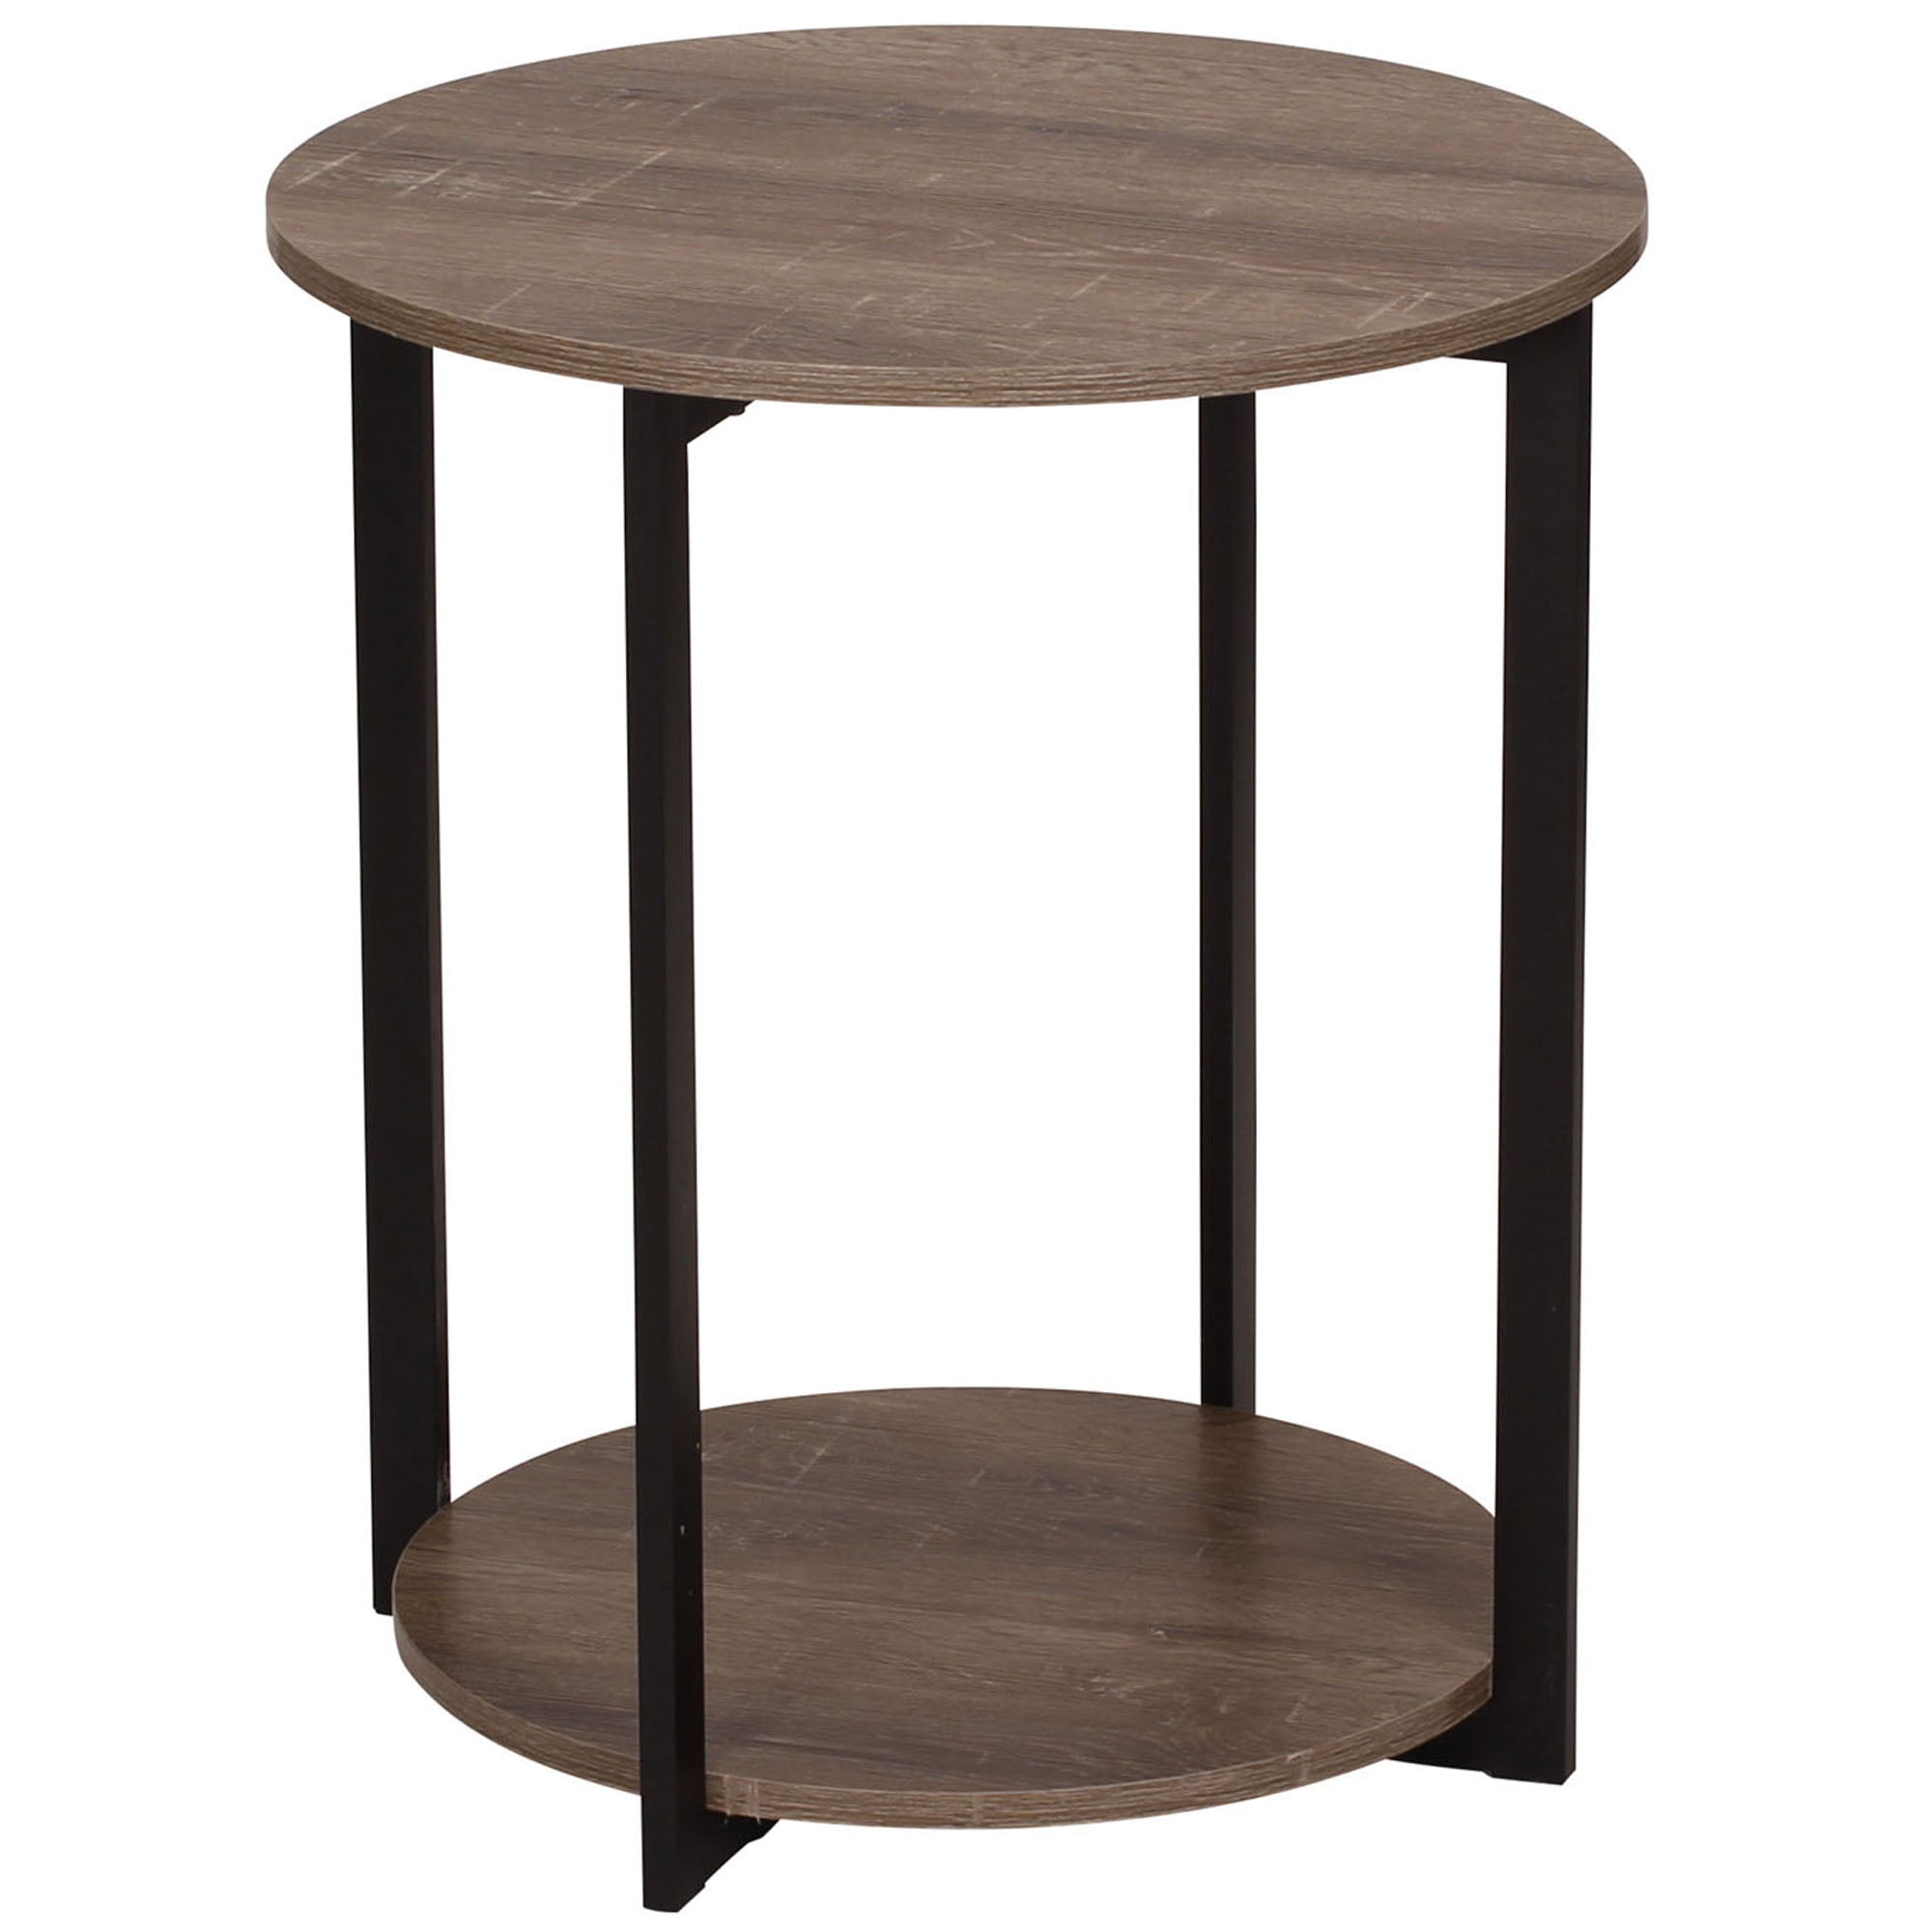 Household Essentials Ashwood Low Round, Round Side Tables With Storage